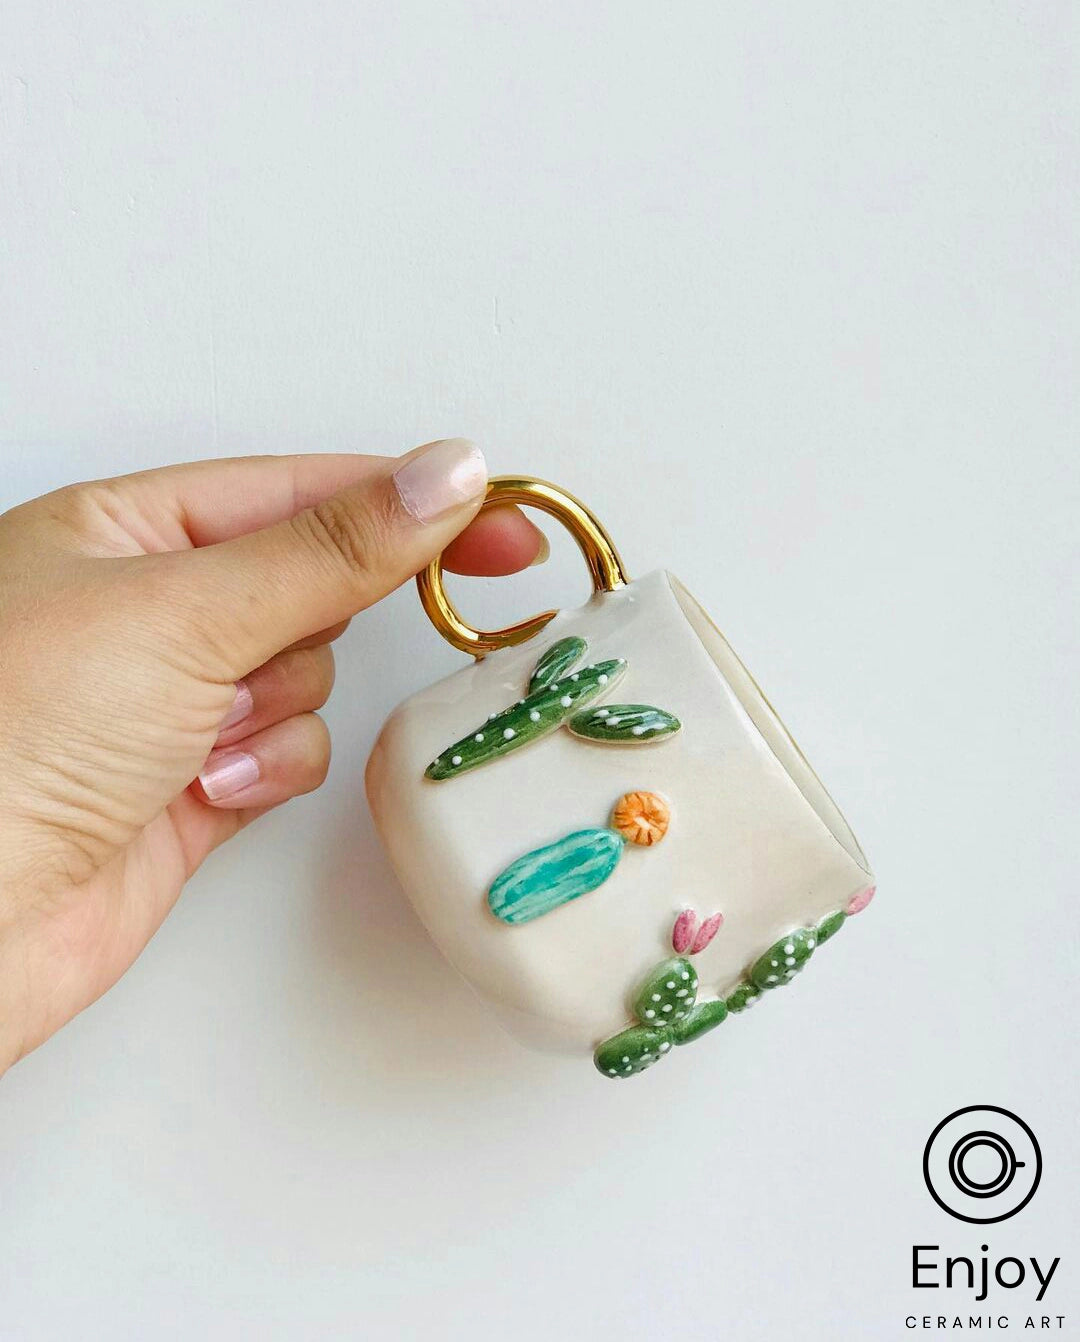 A hand holding a square-shaped white mug with a golden handle, adorned with green cactus designs and small colorful accents.